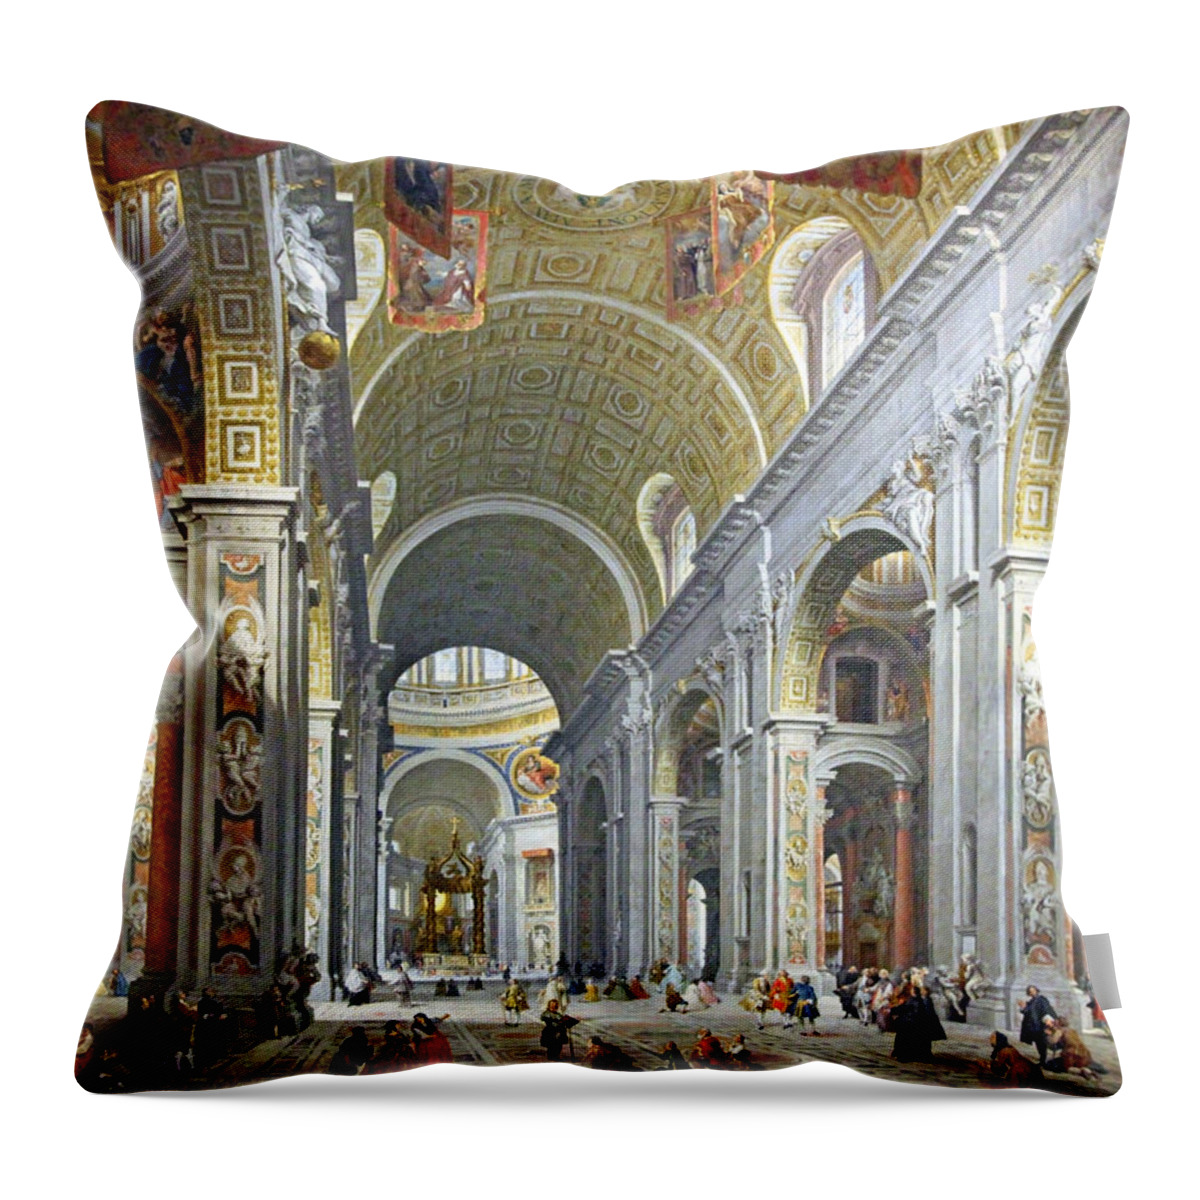 Interior Throw Pillow featuring the photograph Panini's Interior Of Saint Peter's In Rome by Cora Wandel